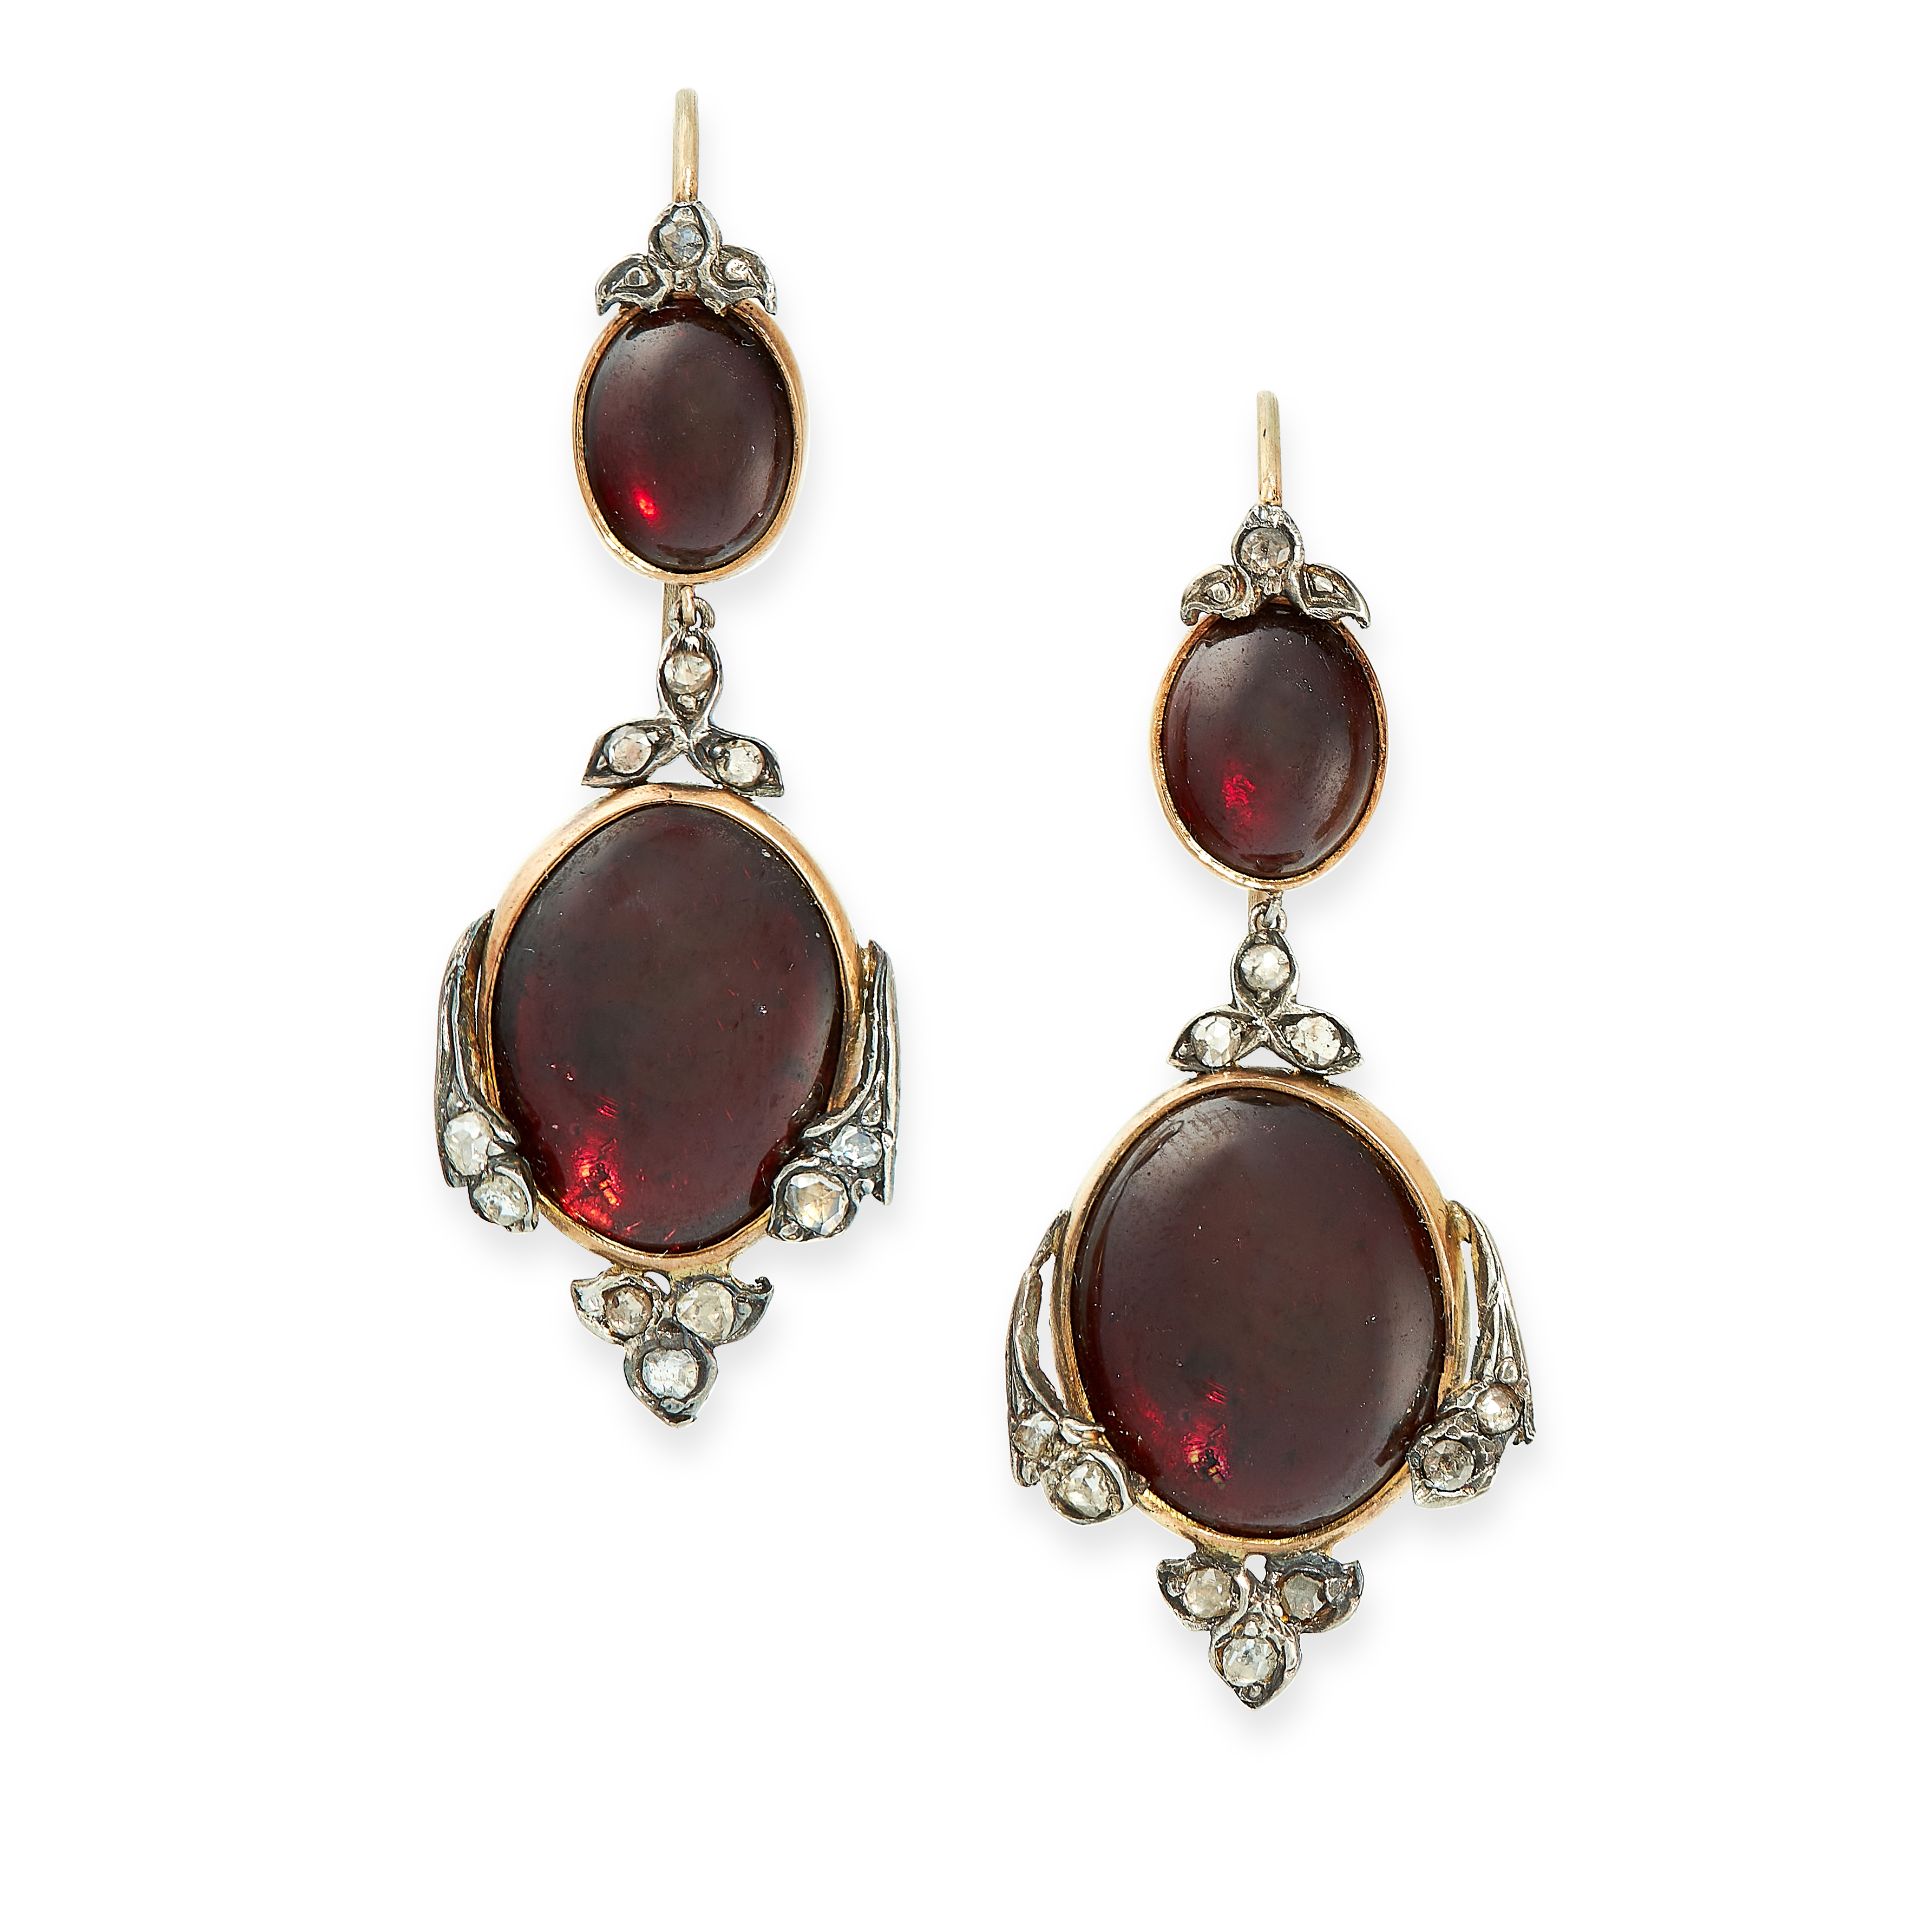 PAIR OF ANTIQUE GARNET AND DIAMOND EARRINGS, 19TH CENTURY mounted in yellow gold and silver, the